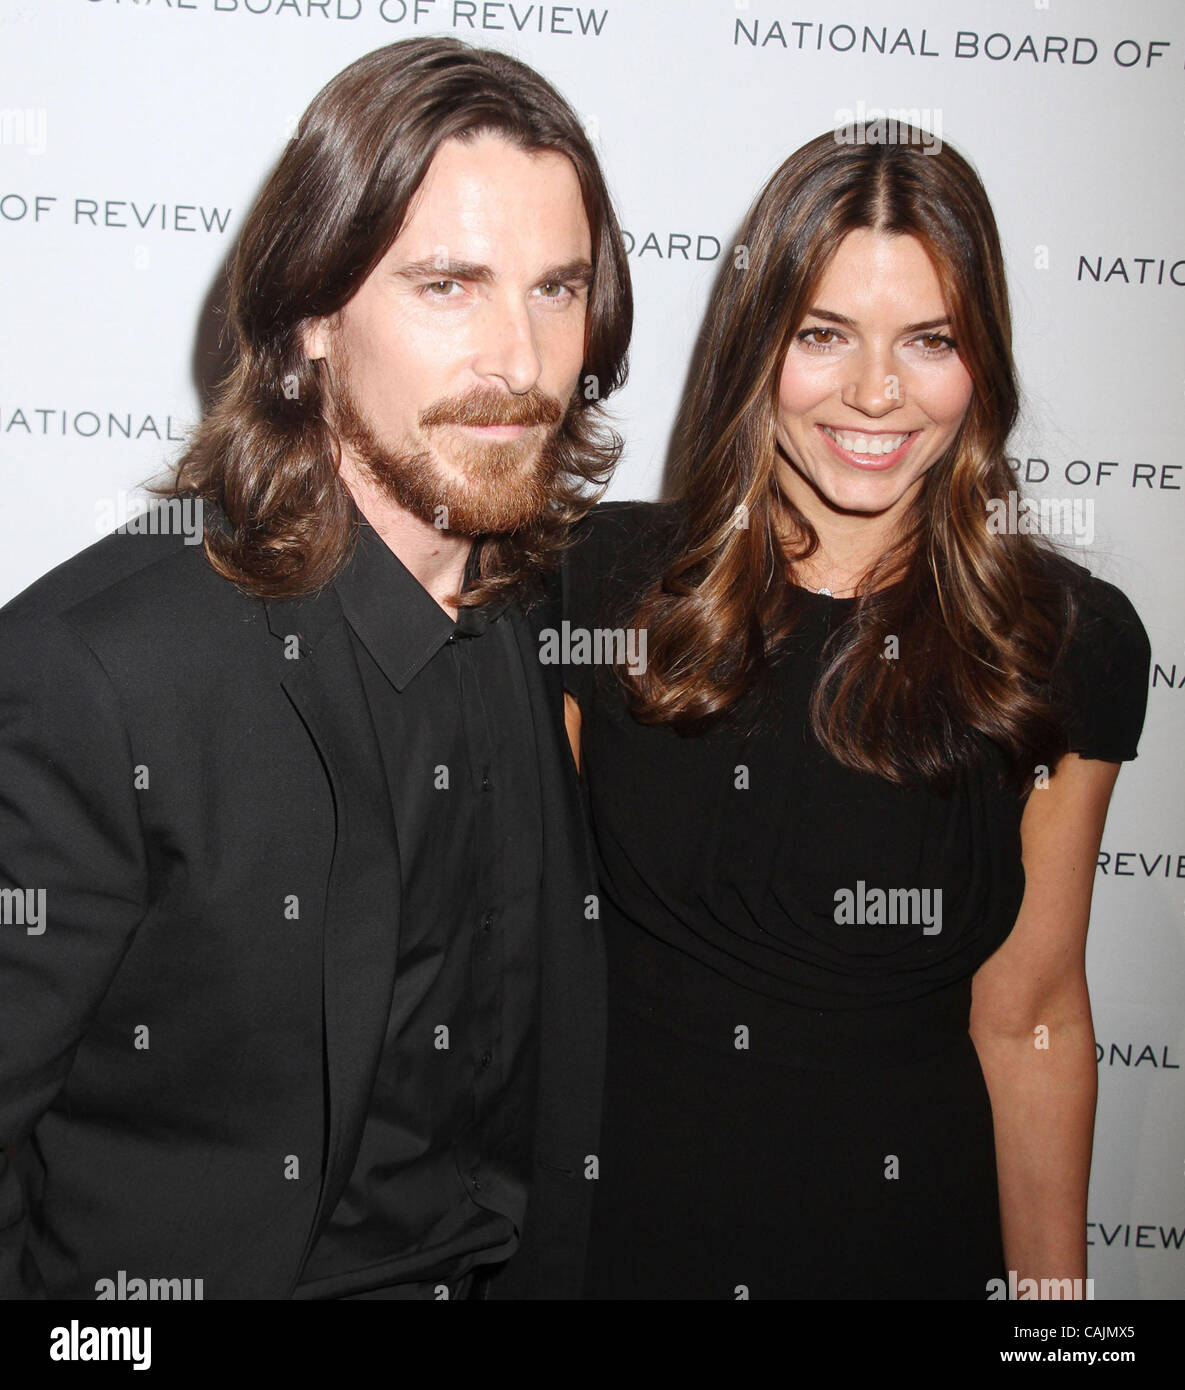 Jan. 11, 2011 - New York, New York, . - Actor CHRISTIAN BALE and his  girlfriend SIBI BLAZIC attend the 2011 National Board of Review of Motion  Pictures Awards Gala held at